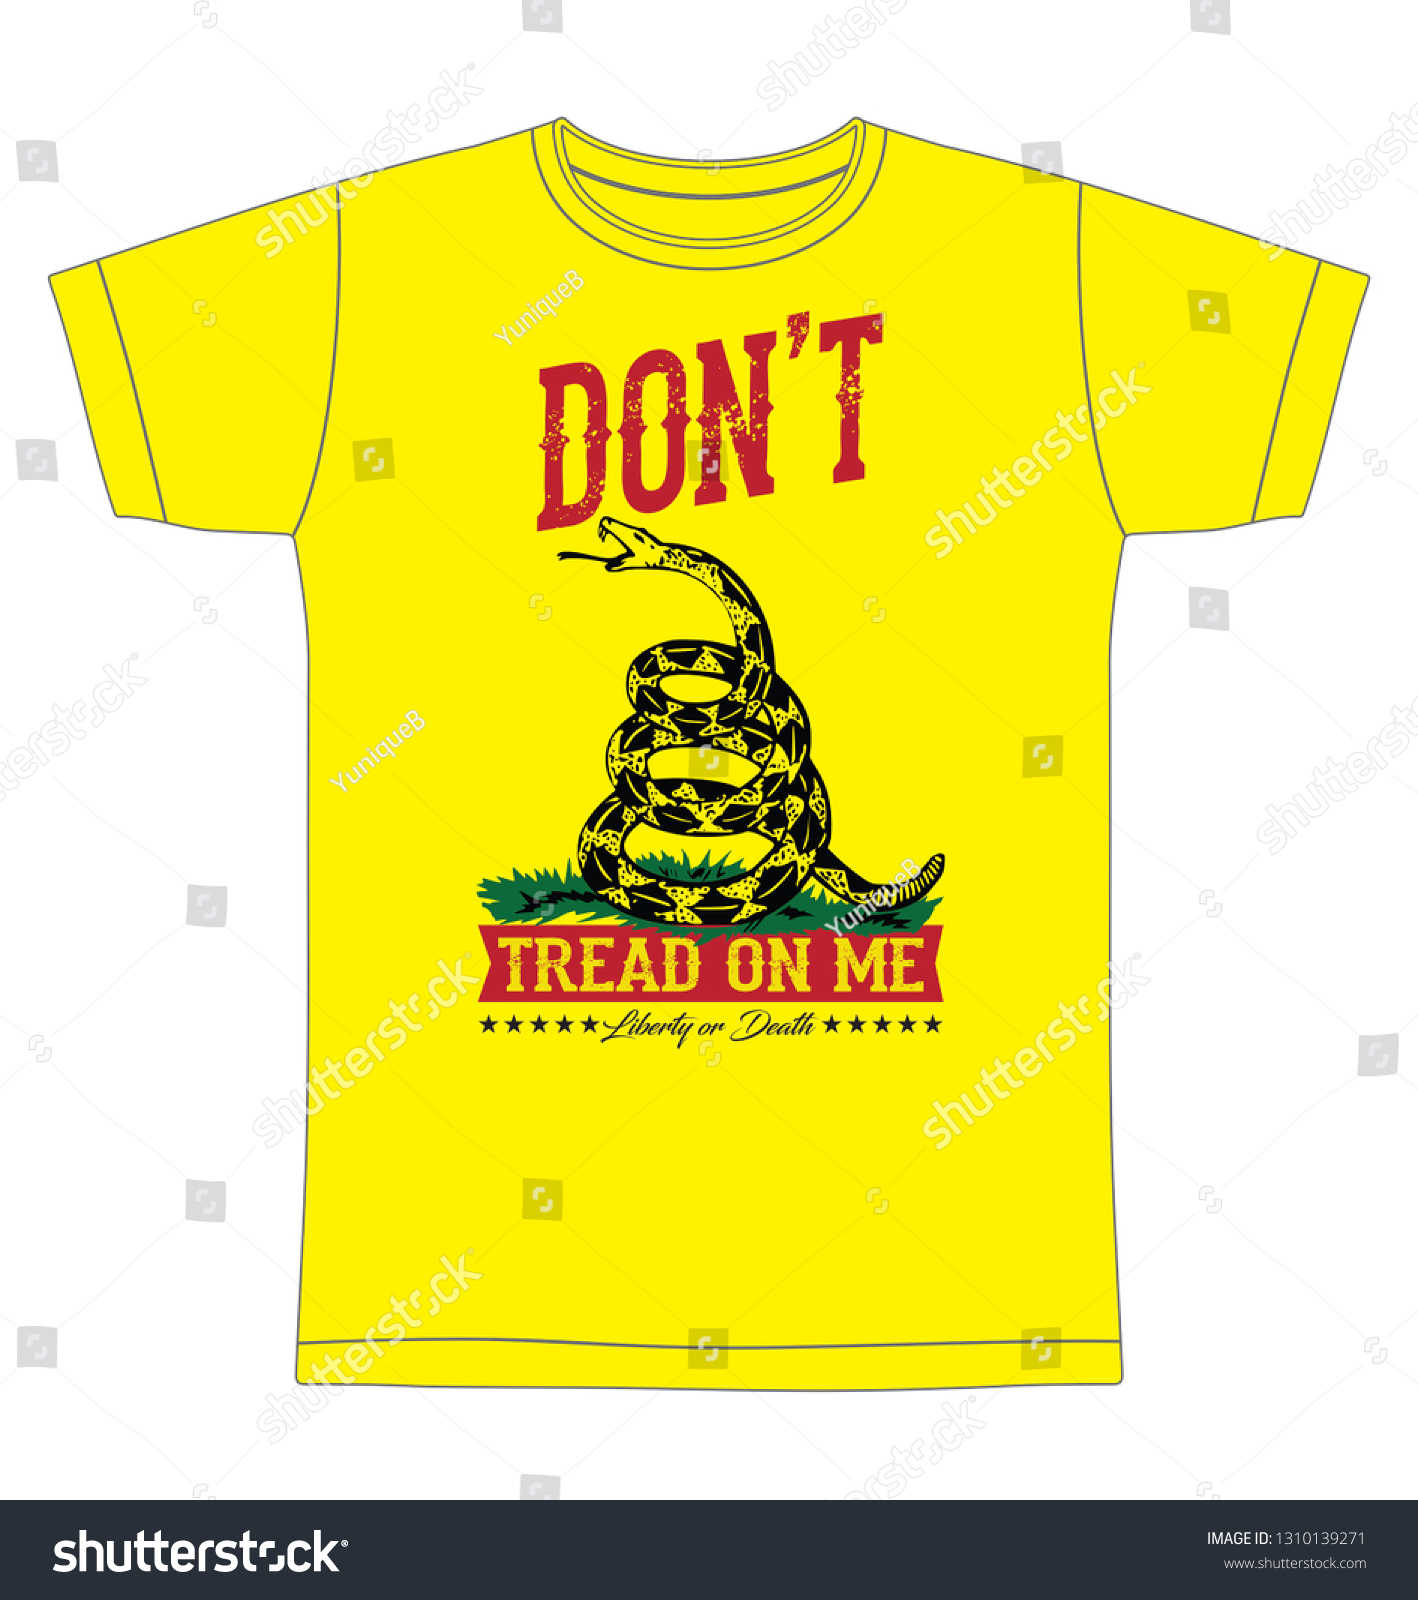 SVG of Don't Tread on Me T-shirt Graphic in Yellow T-shirt Template svg